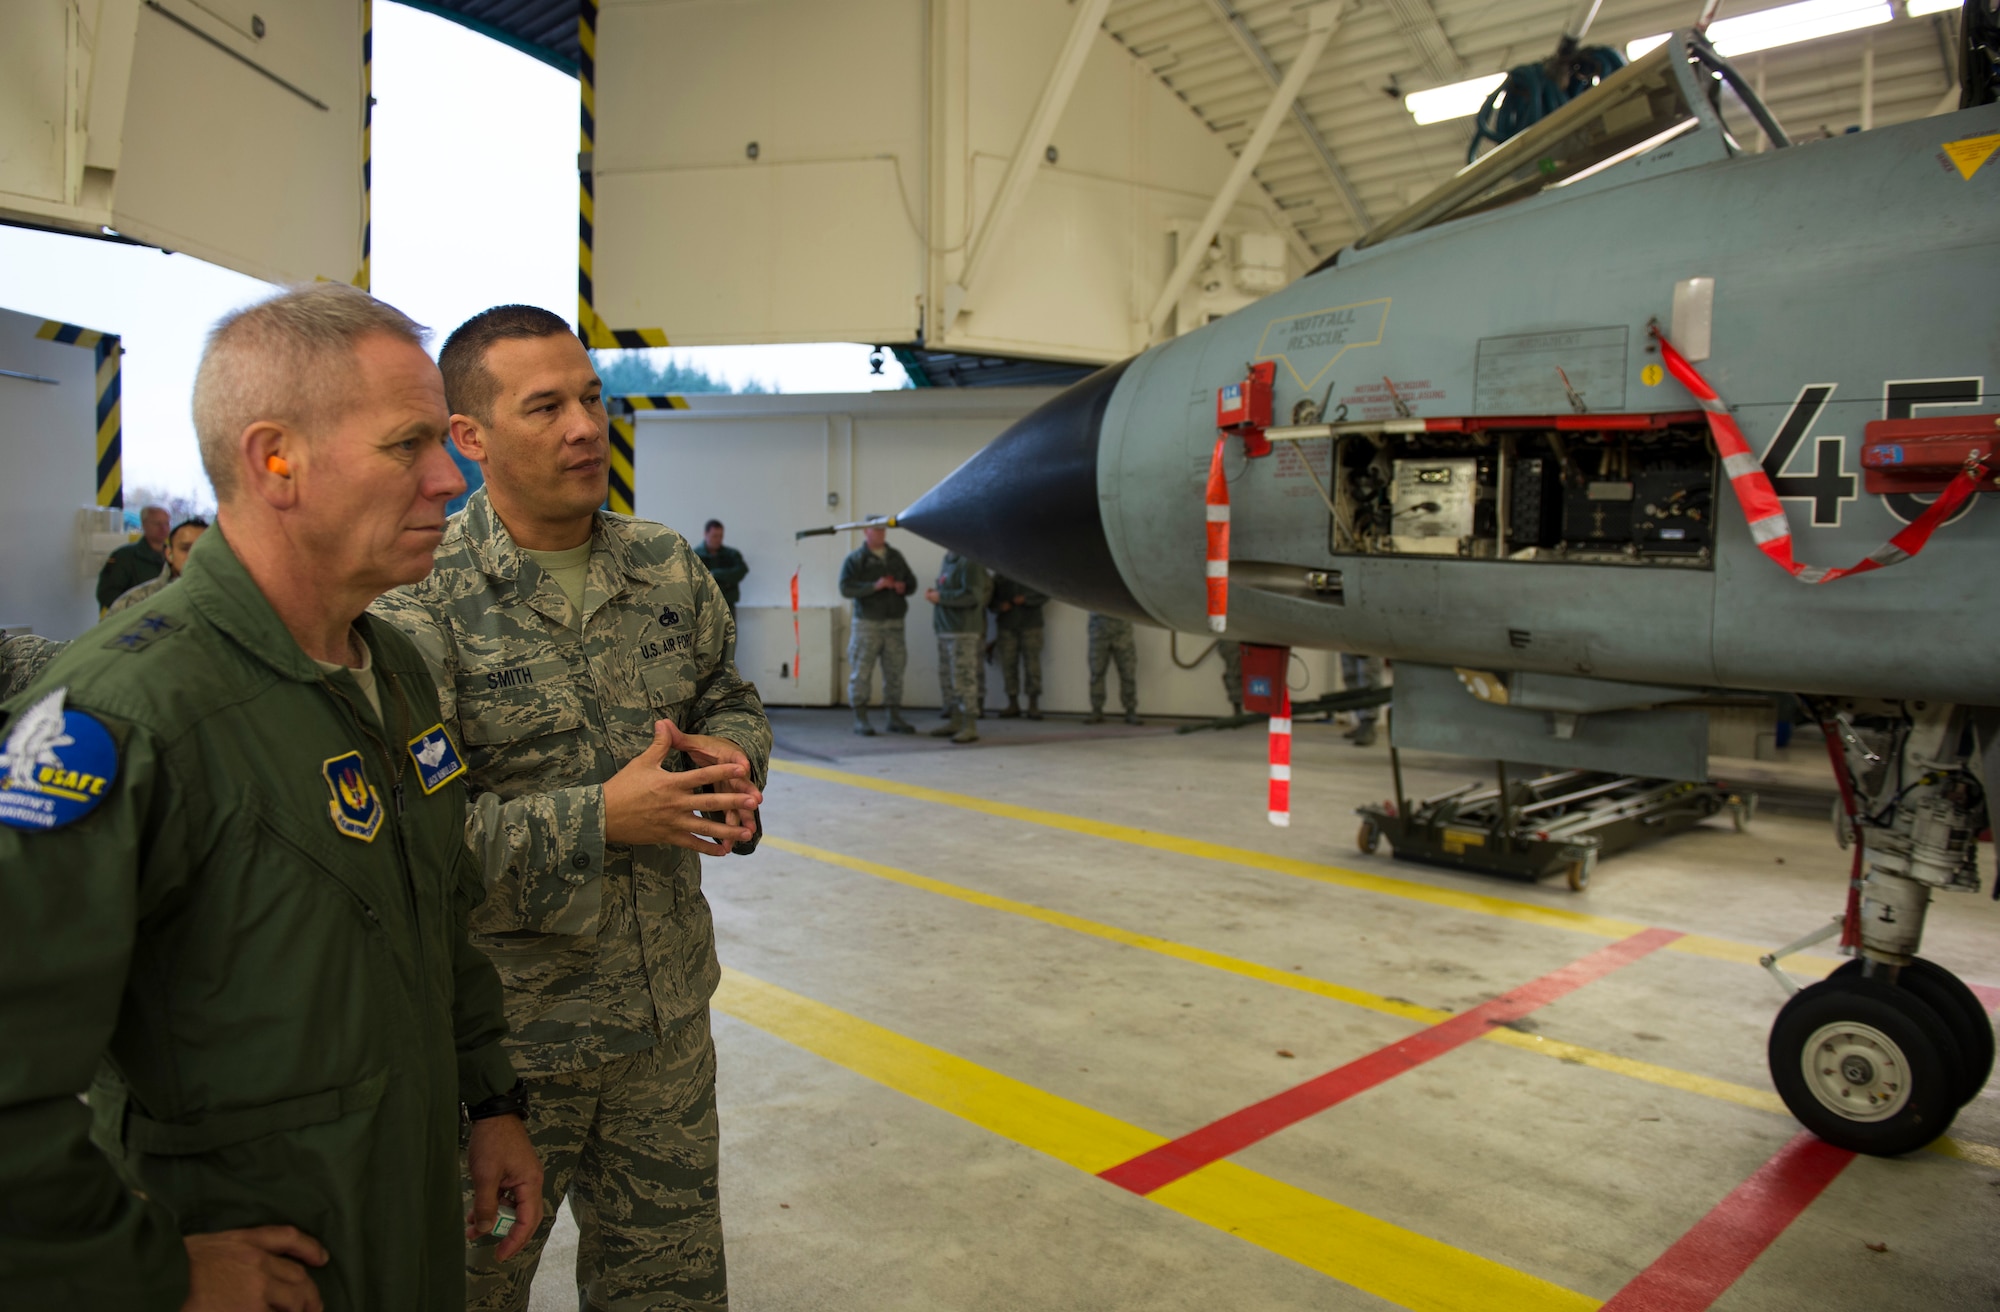 U.S. Air Force Master Sgt. Nathen Smith, 702nd Munitions Support Squadron senior load monitor, briefs U.S. Air Force Maj. Gen. John McMullen, U.S. Air Forces in Europe and Air Forces Africa Strategic Deterrence Integration director of operations, on how munitions are loaded onto a German air force PA-200 Tornado multirole combat aircraft during a tour of 702nd MUNSS at Buechel Air Base, Germany, Nov. 10, 2015. The 702nd MUNSS is a geographically separated unit responsible for receipt, storage, maintenance and control of US war reserve munitions in support of the German air force 33rd Fighter-Bomber Wing. (U.S. Air Force photo by Staff Sgt. Christopher Ruano/Released)